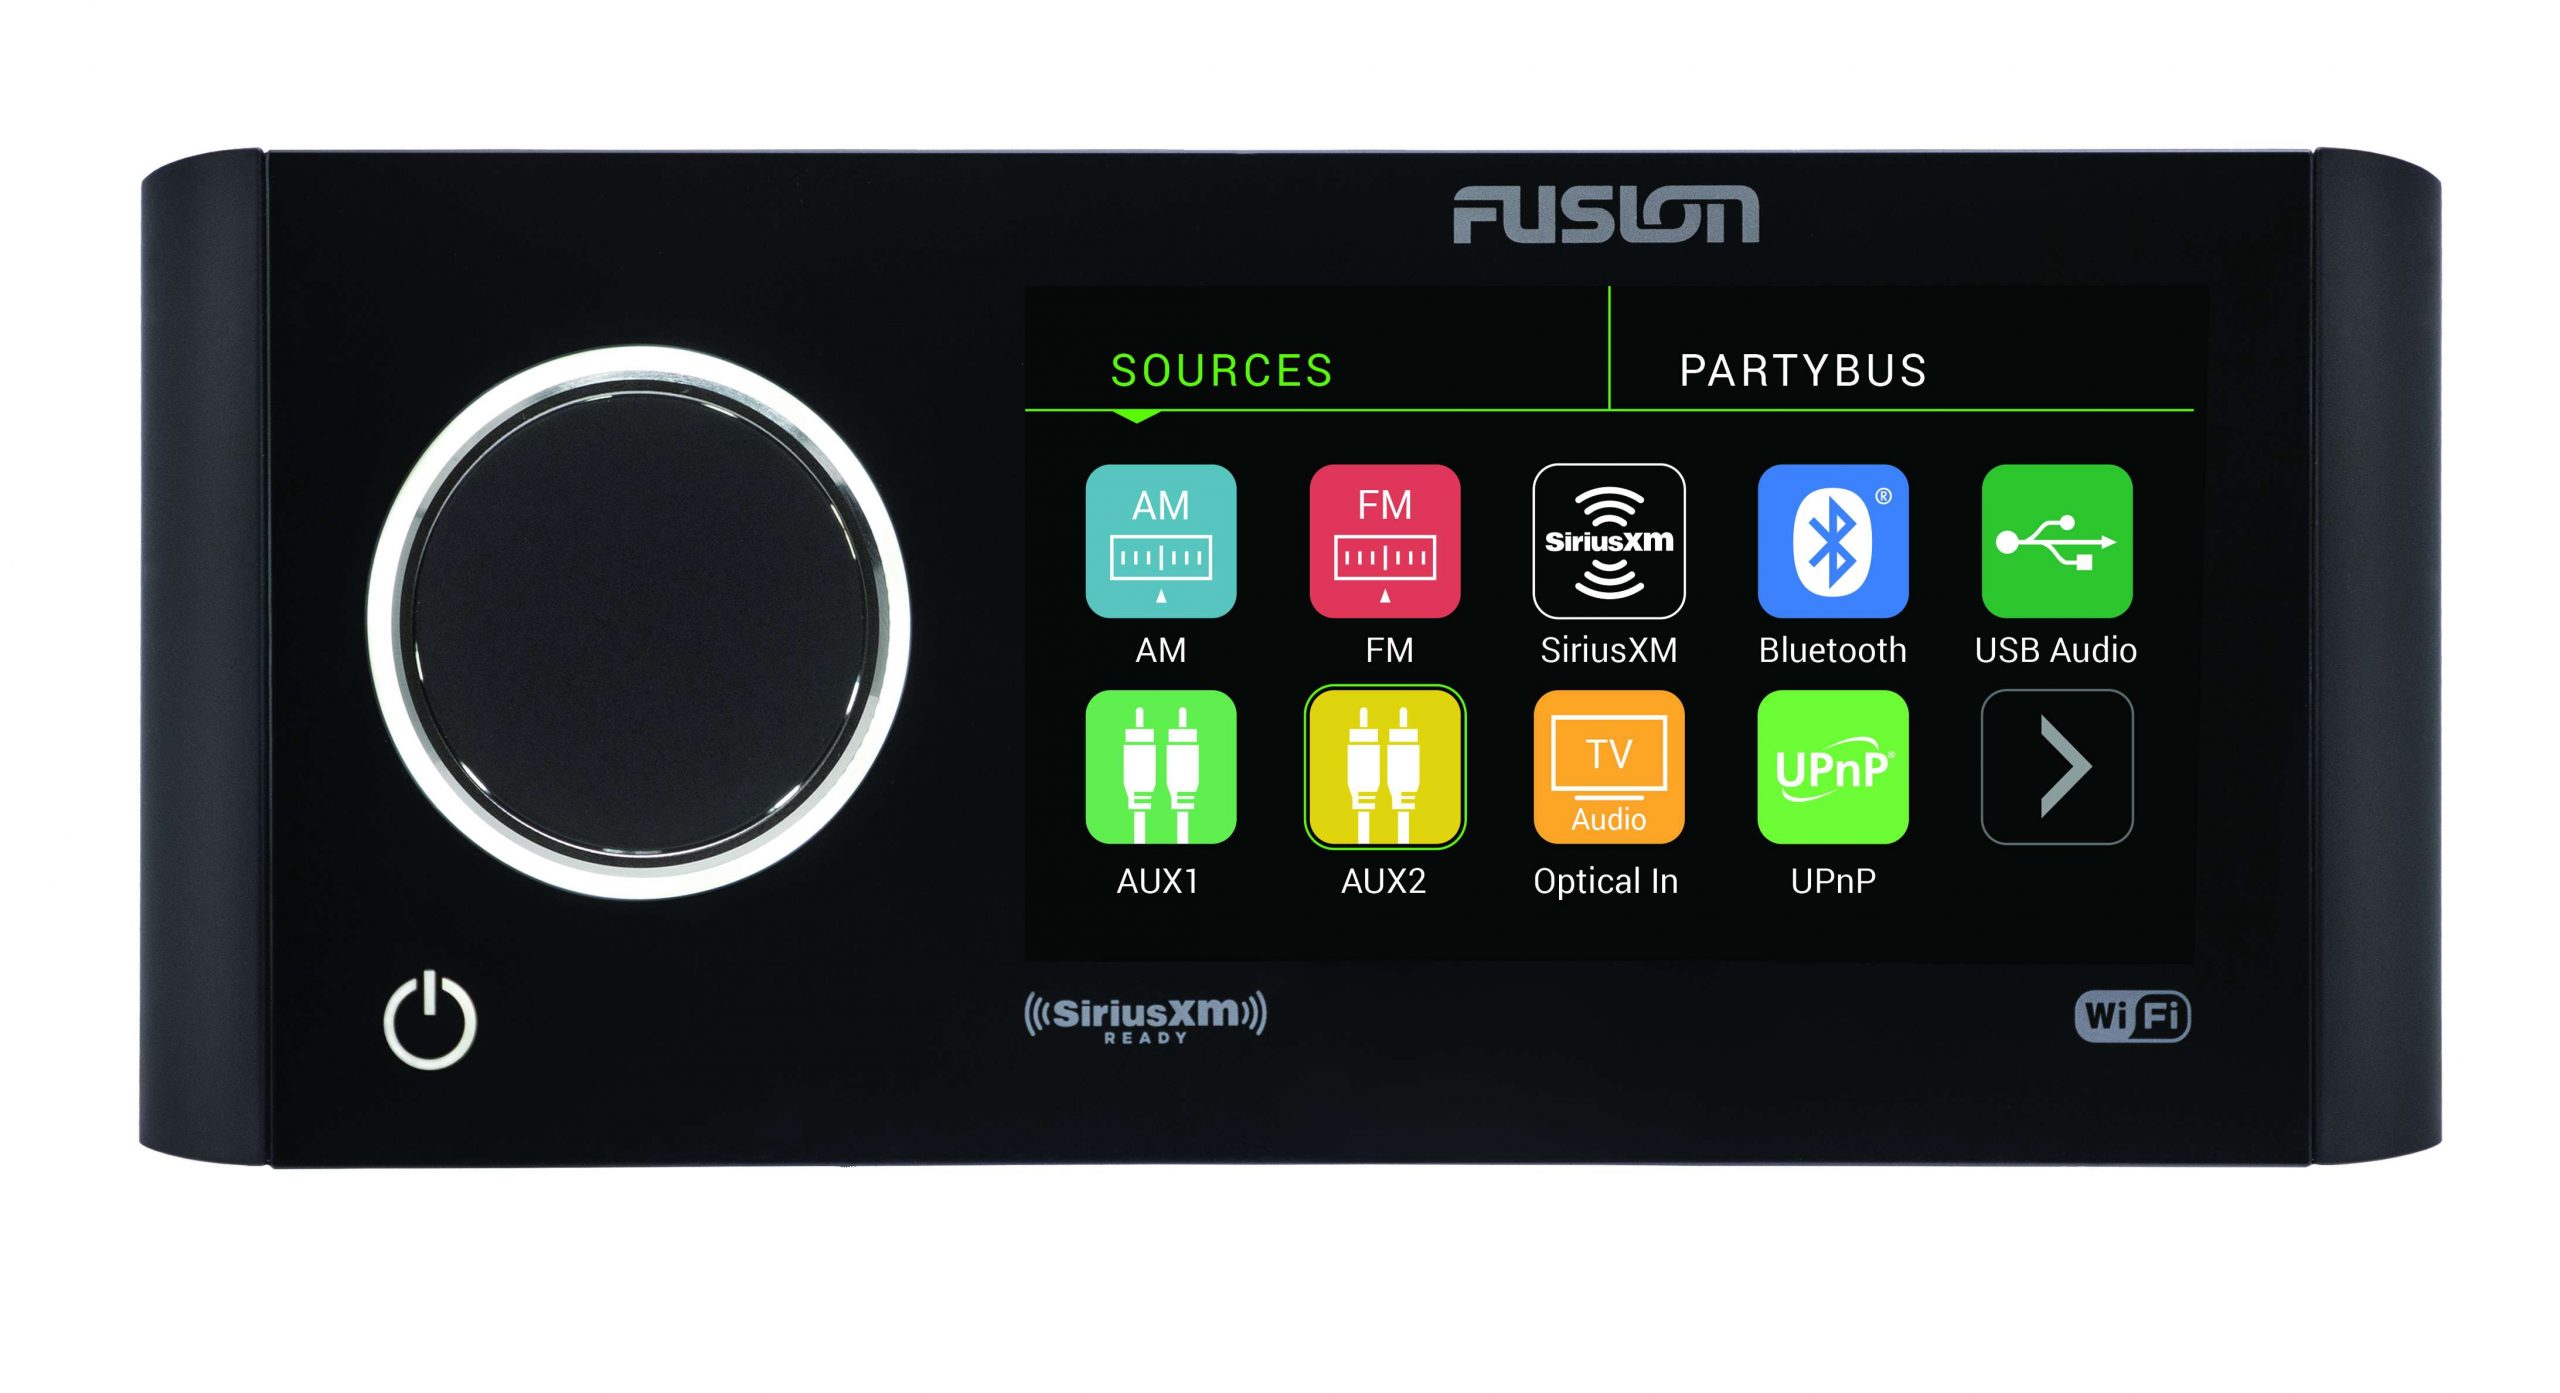 Fusion RA770<BR>
Fusion<BR>$649<BR>
The Fusion RA770 is the flagship of the new Apollo Series and the worldâs first purpose-built marine entertainment system with a one-piece glass touchscreen display, built-in Wi-Fi streaming, Digital Signal Processing Technology (DSP) and PartyBus capabilities. Featuring a brilliant, optically bonded, full-color LCD display, the RA770âs one-piece glass touchscreen makes trying to locate the correct button a thing of the past. Users can simply tap the screen to pause and play, or swipe through a playlist to find their favorite song.
<BR><BR>
The Apollo Series is the pinnacle of sound quality; it harnesses the power of Fusion DSP, providing premium audio delivery to all speakers in any environment. Precisely calculated loudness curves optimized for the human ear ensure excellent audio delivery at every volume level â giving full-range sound whether the volume is turned all the way up or all the way down.
<BR><BR>
PartyBus gives boaters the power to command the party across the whole boat or quietly relax in a single cabin, regardless of othersâ preferences. Each additional PartyBus enabled stereo gives the option to join Party Mode and play the same perfectly synced audio source through the entire vessel. Boaters can also opt into Personal Mode and listen from the stereo in their zone of choice without disrupting Party Mode in the other areas of the vessel.



